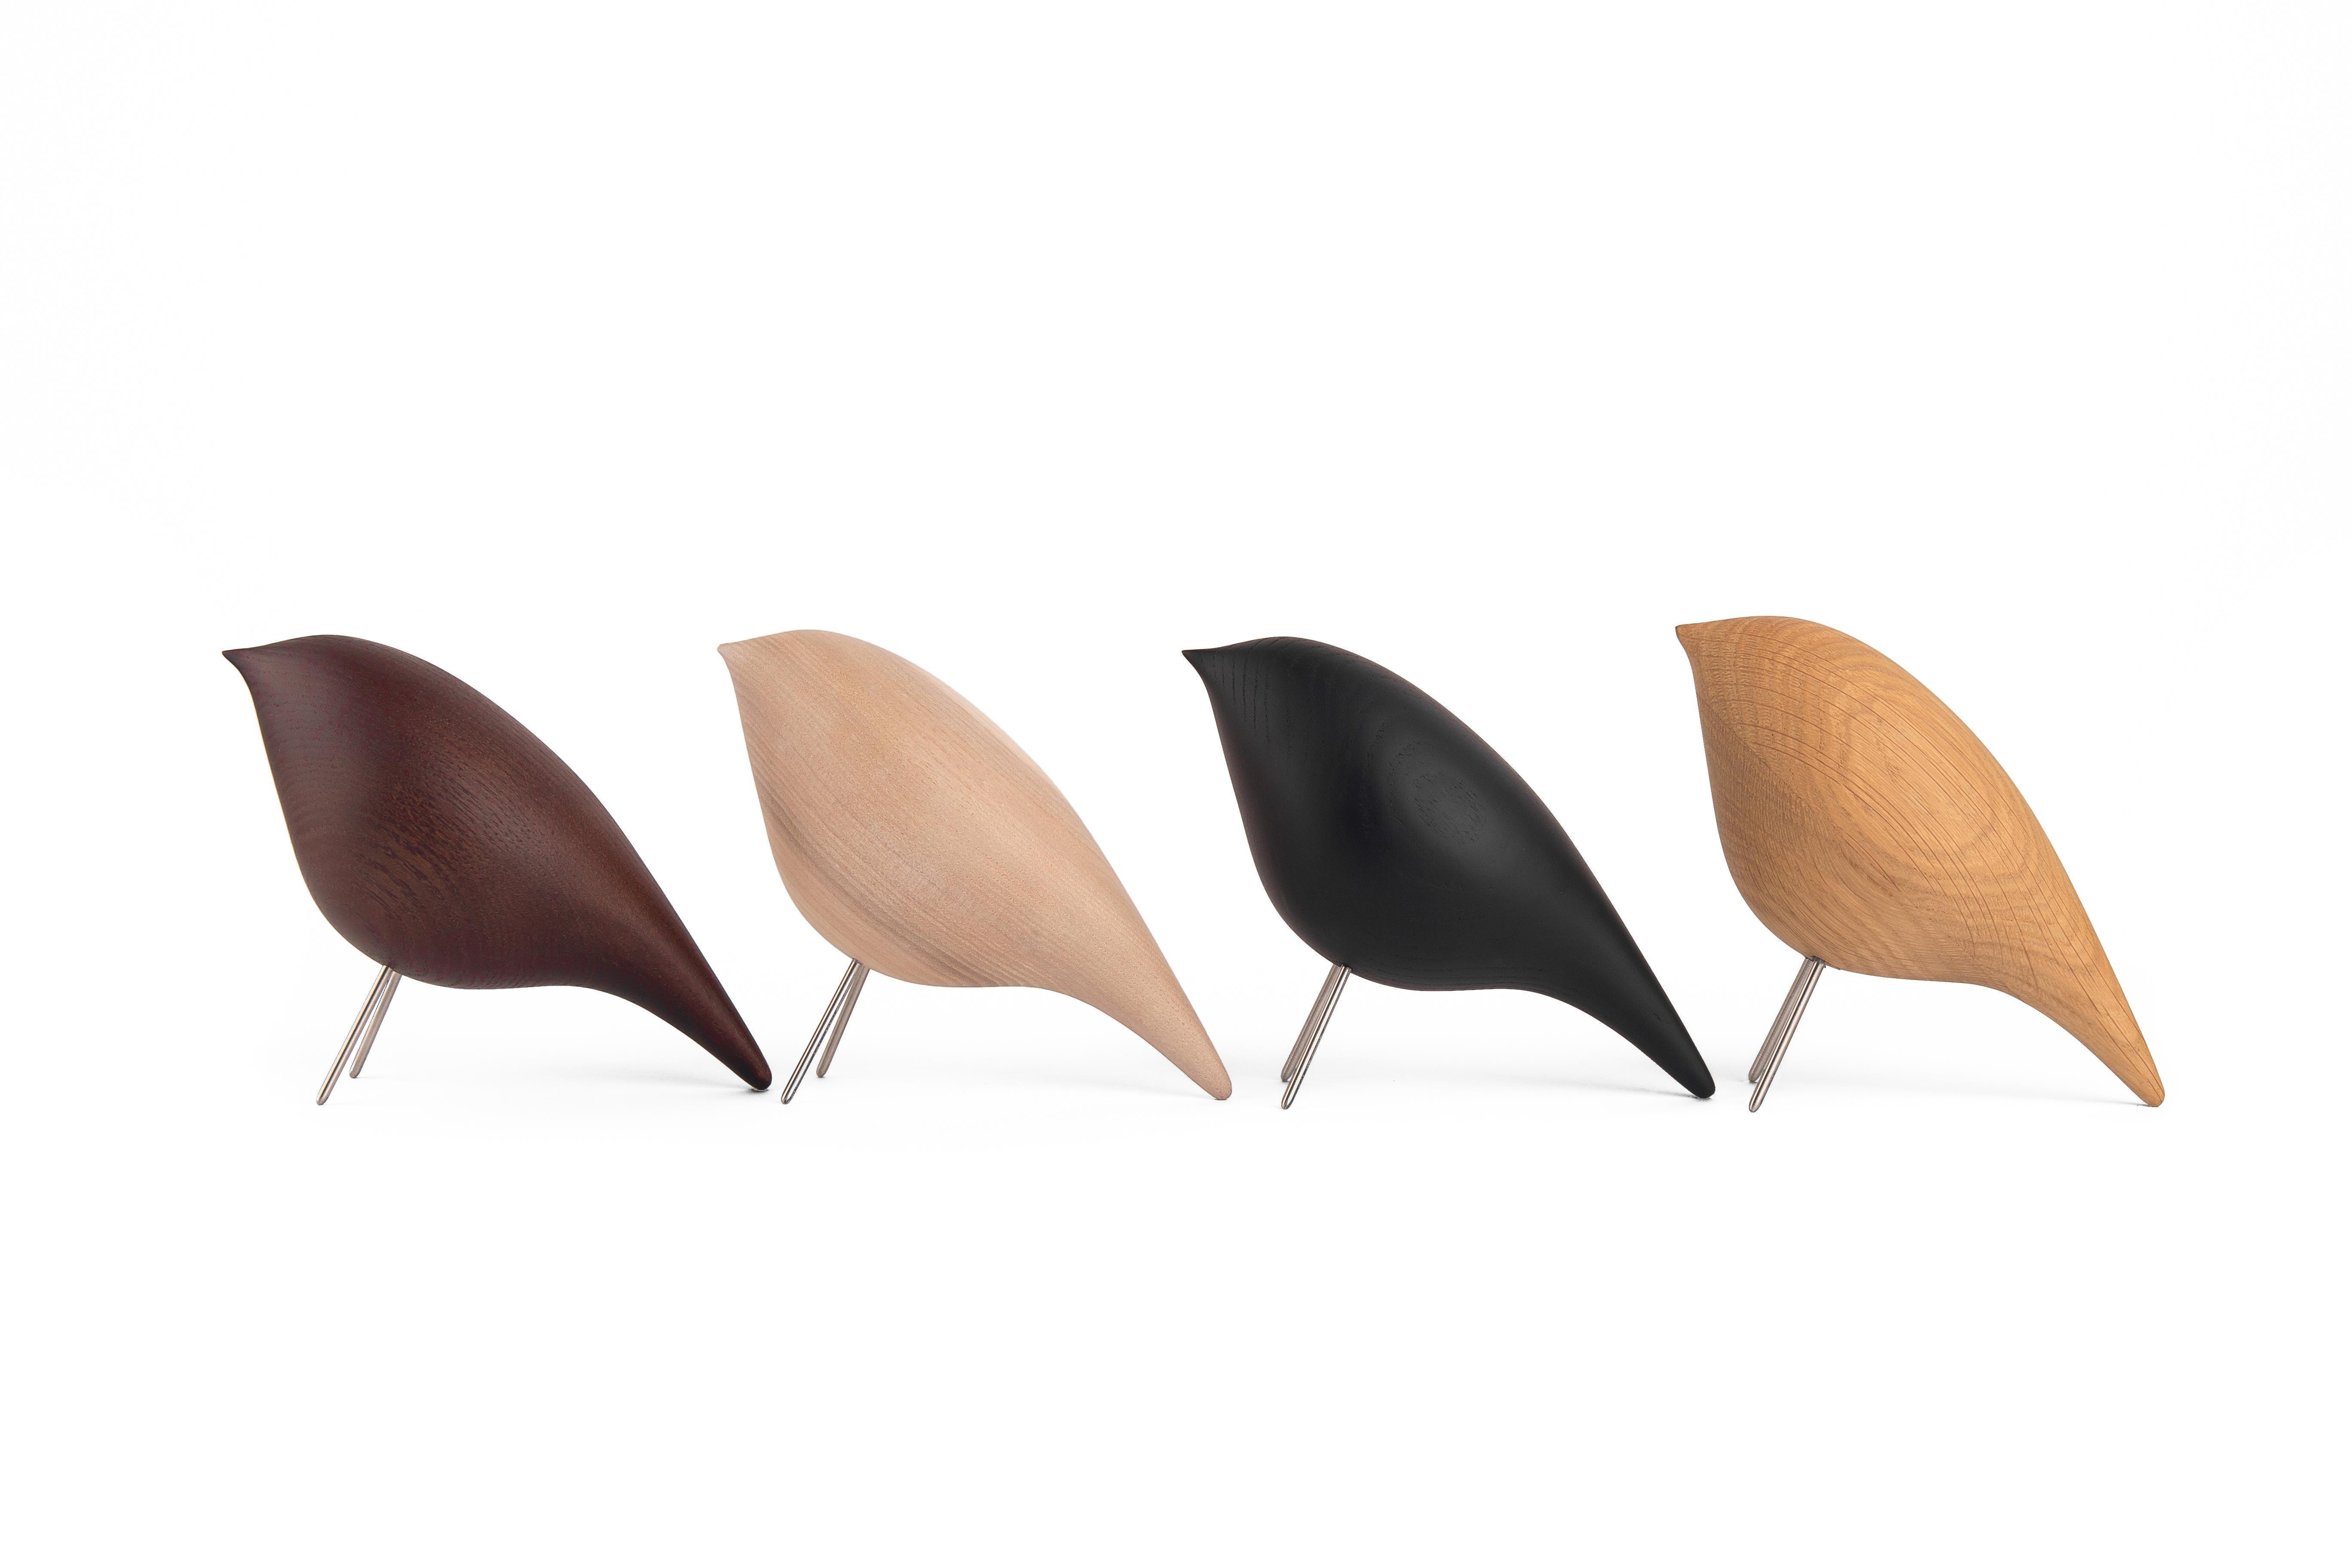 Wood Contemporary 'Tweety Decorative Bird CS3' by Noom, Black Ashwood, In stock For Sale